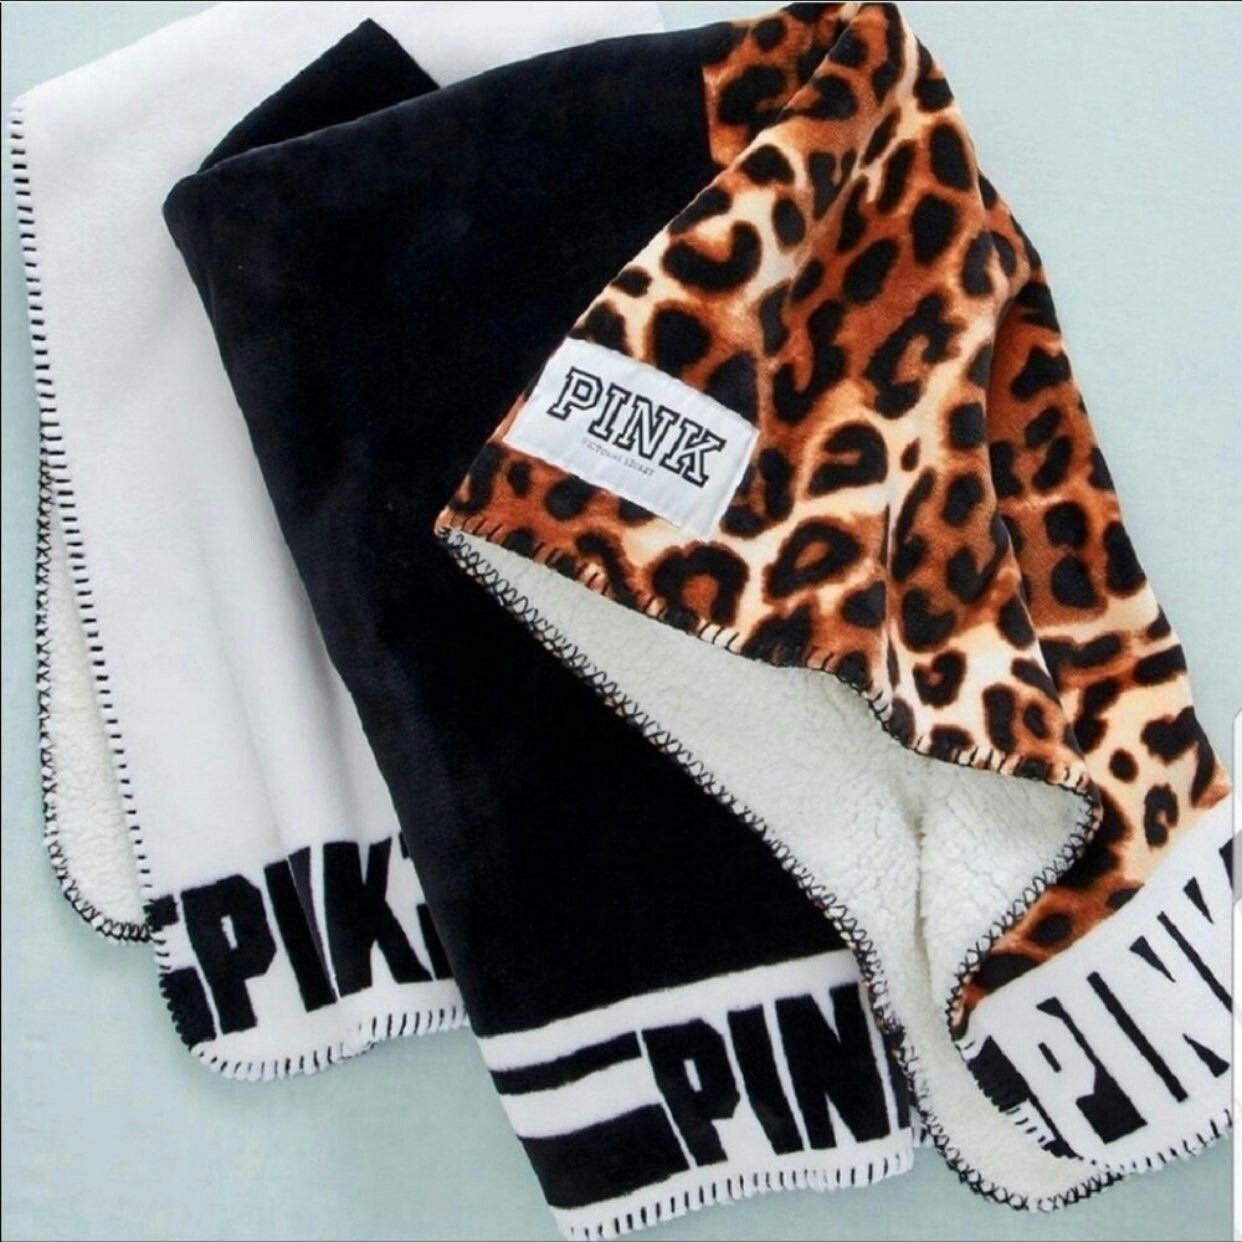 New Victoria's Secret Pink sherpa leopard animal cheetah print color block  blanket 2018 limited edition for Sale in Brea, CA - OfferUp